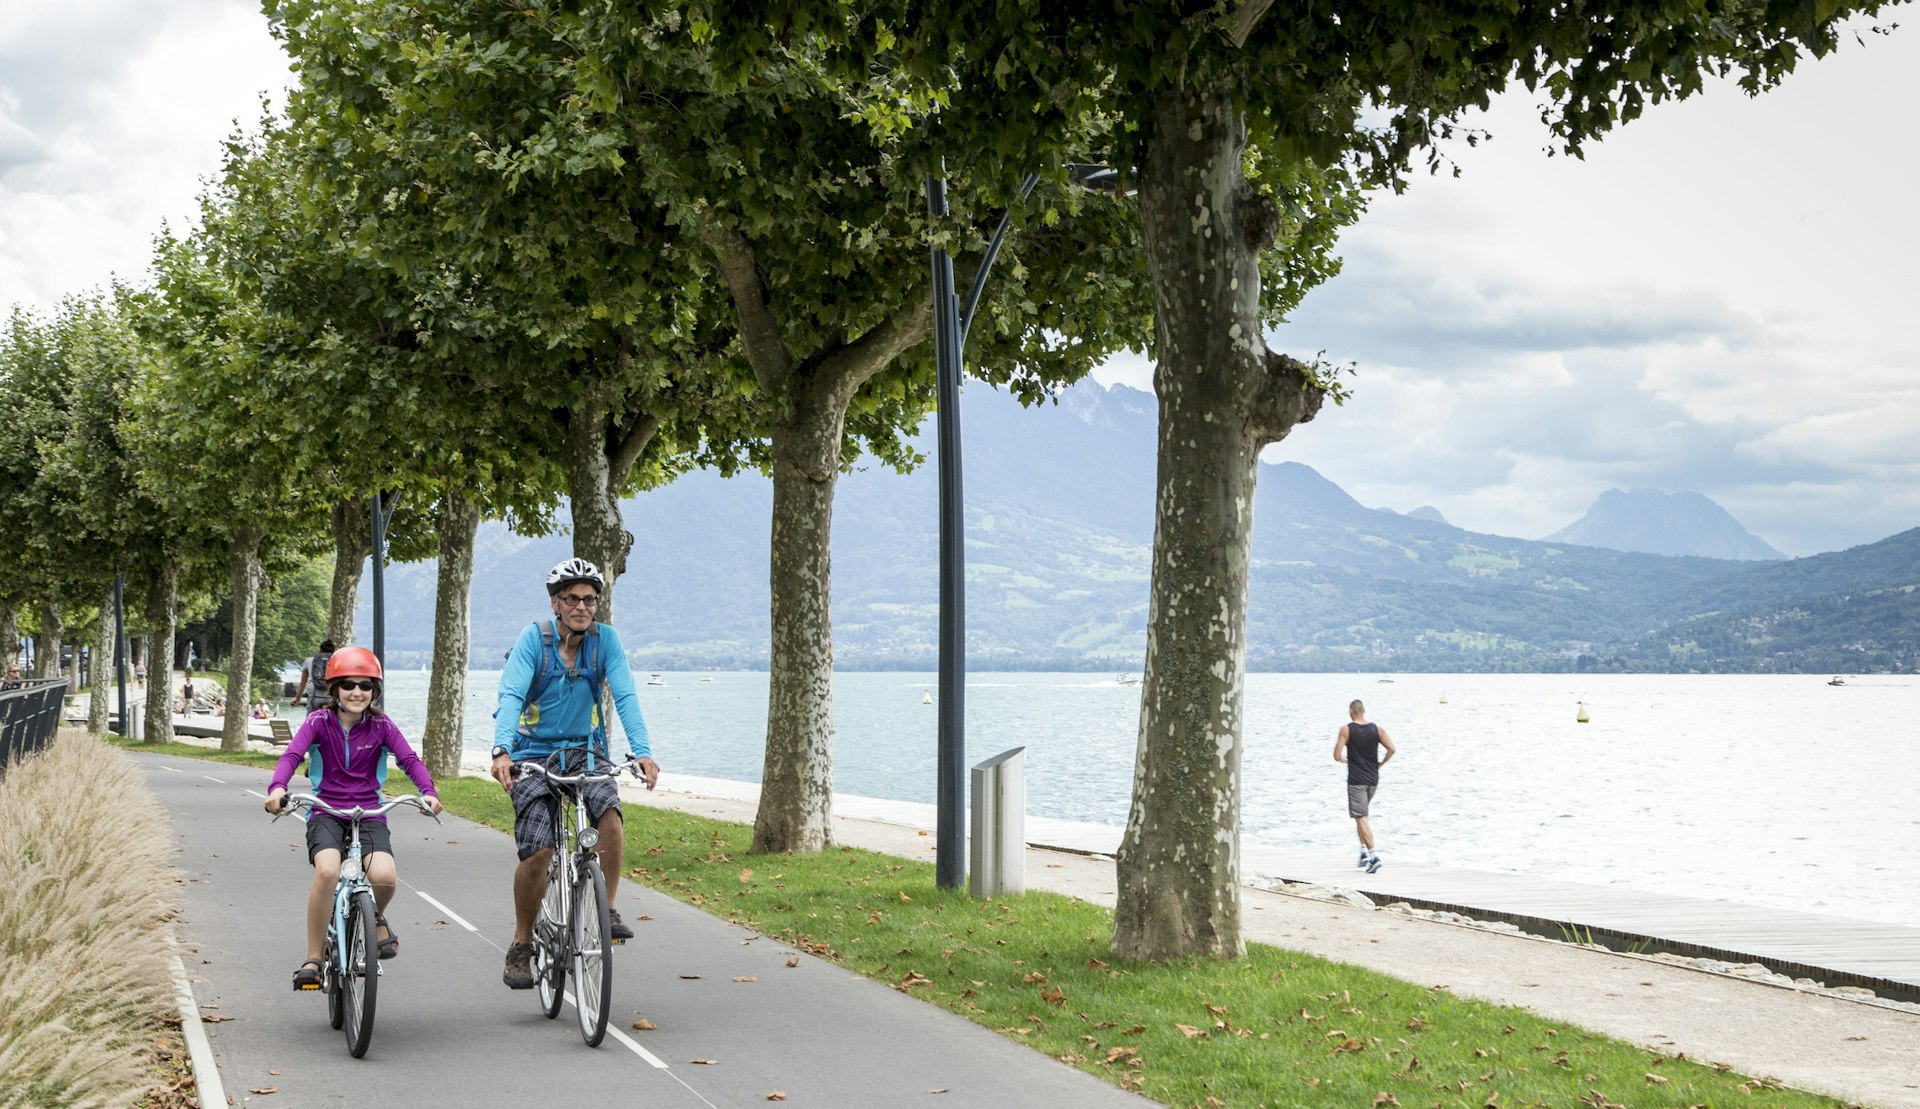 An adult and a child ride bikes alongside each other on a lakeside cycle path